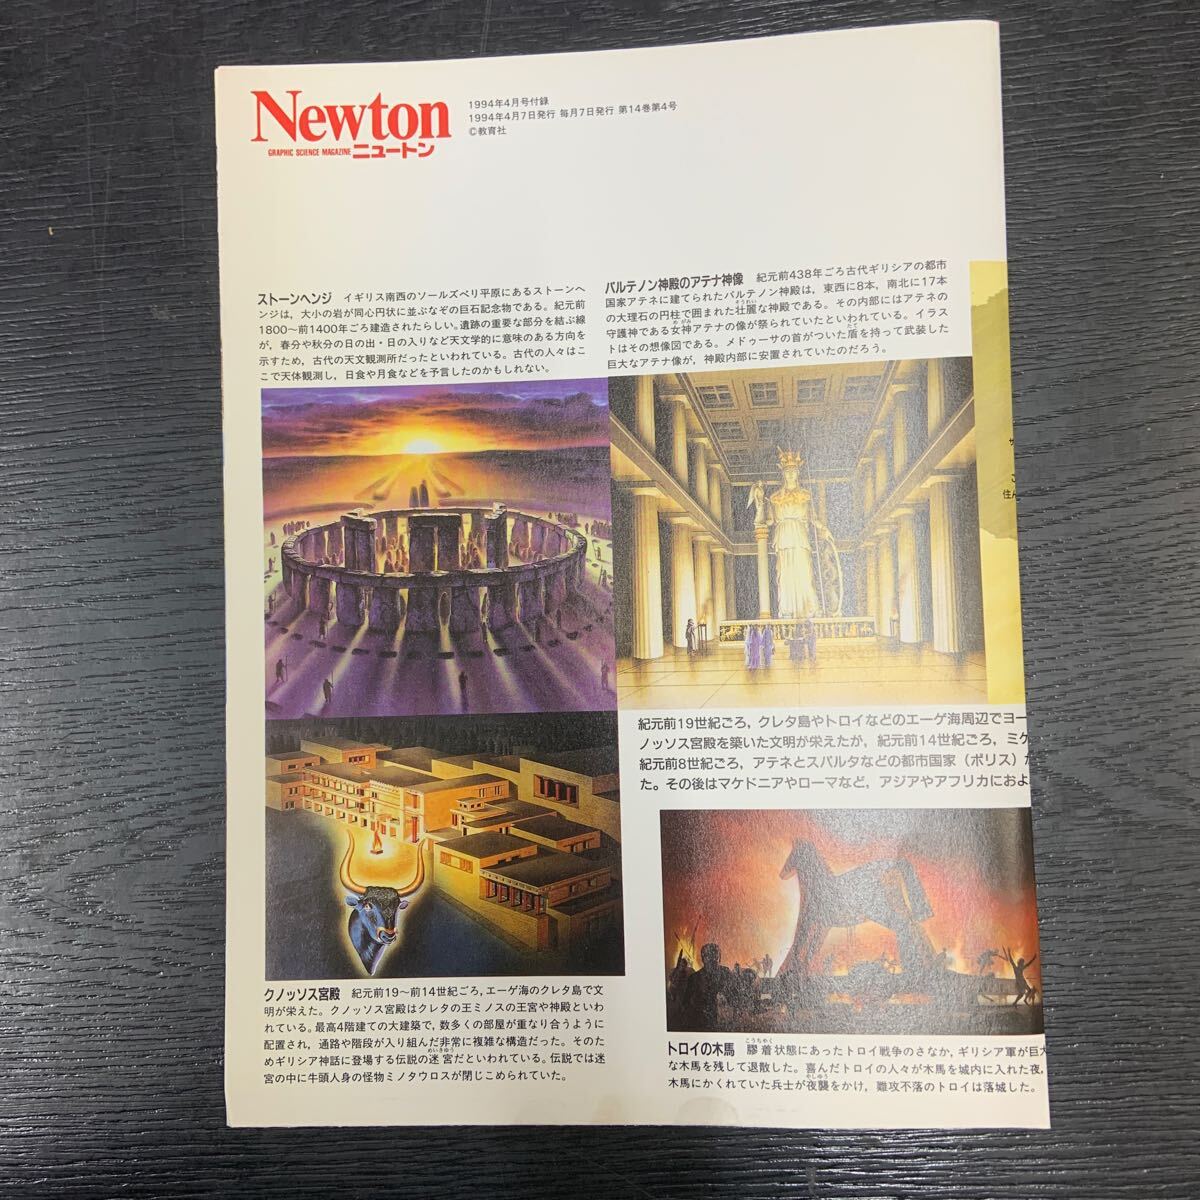 Newton 1994 year 1 month number ~1996 year 12 month number set / binder -, appendix attaching 